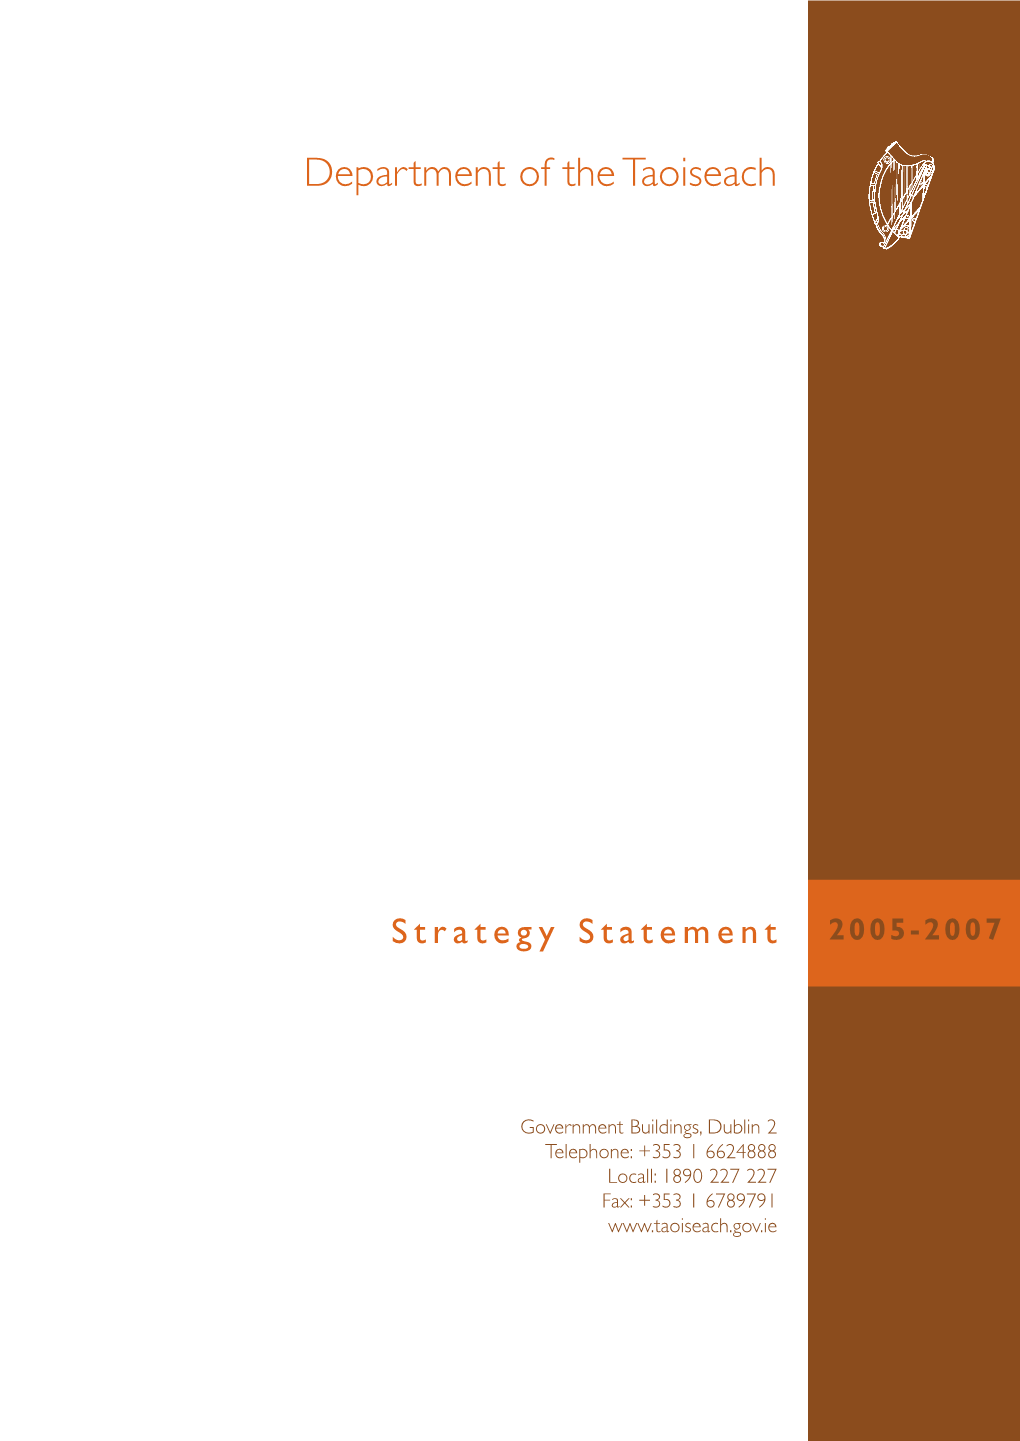 Department of the Taoiseach Strategy Statement 2005-2007